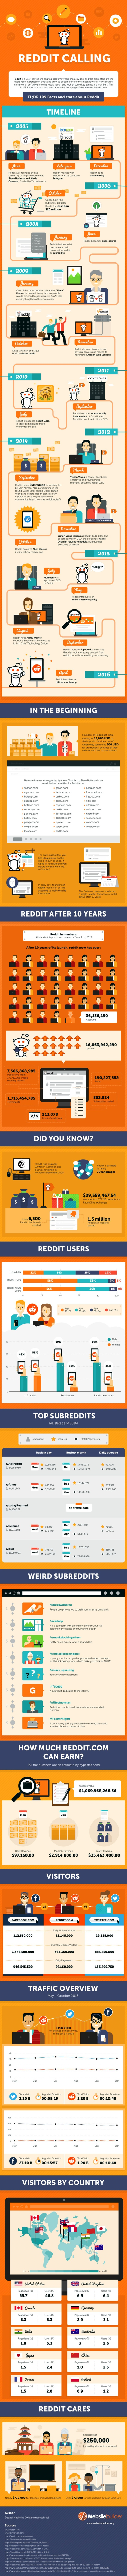 The Ultimate Cheat Sheet to Reddit [Infographic] - Social Media Explorer | The MarTech Digest | Scoop.it